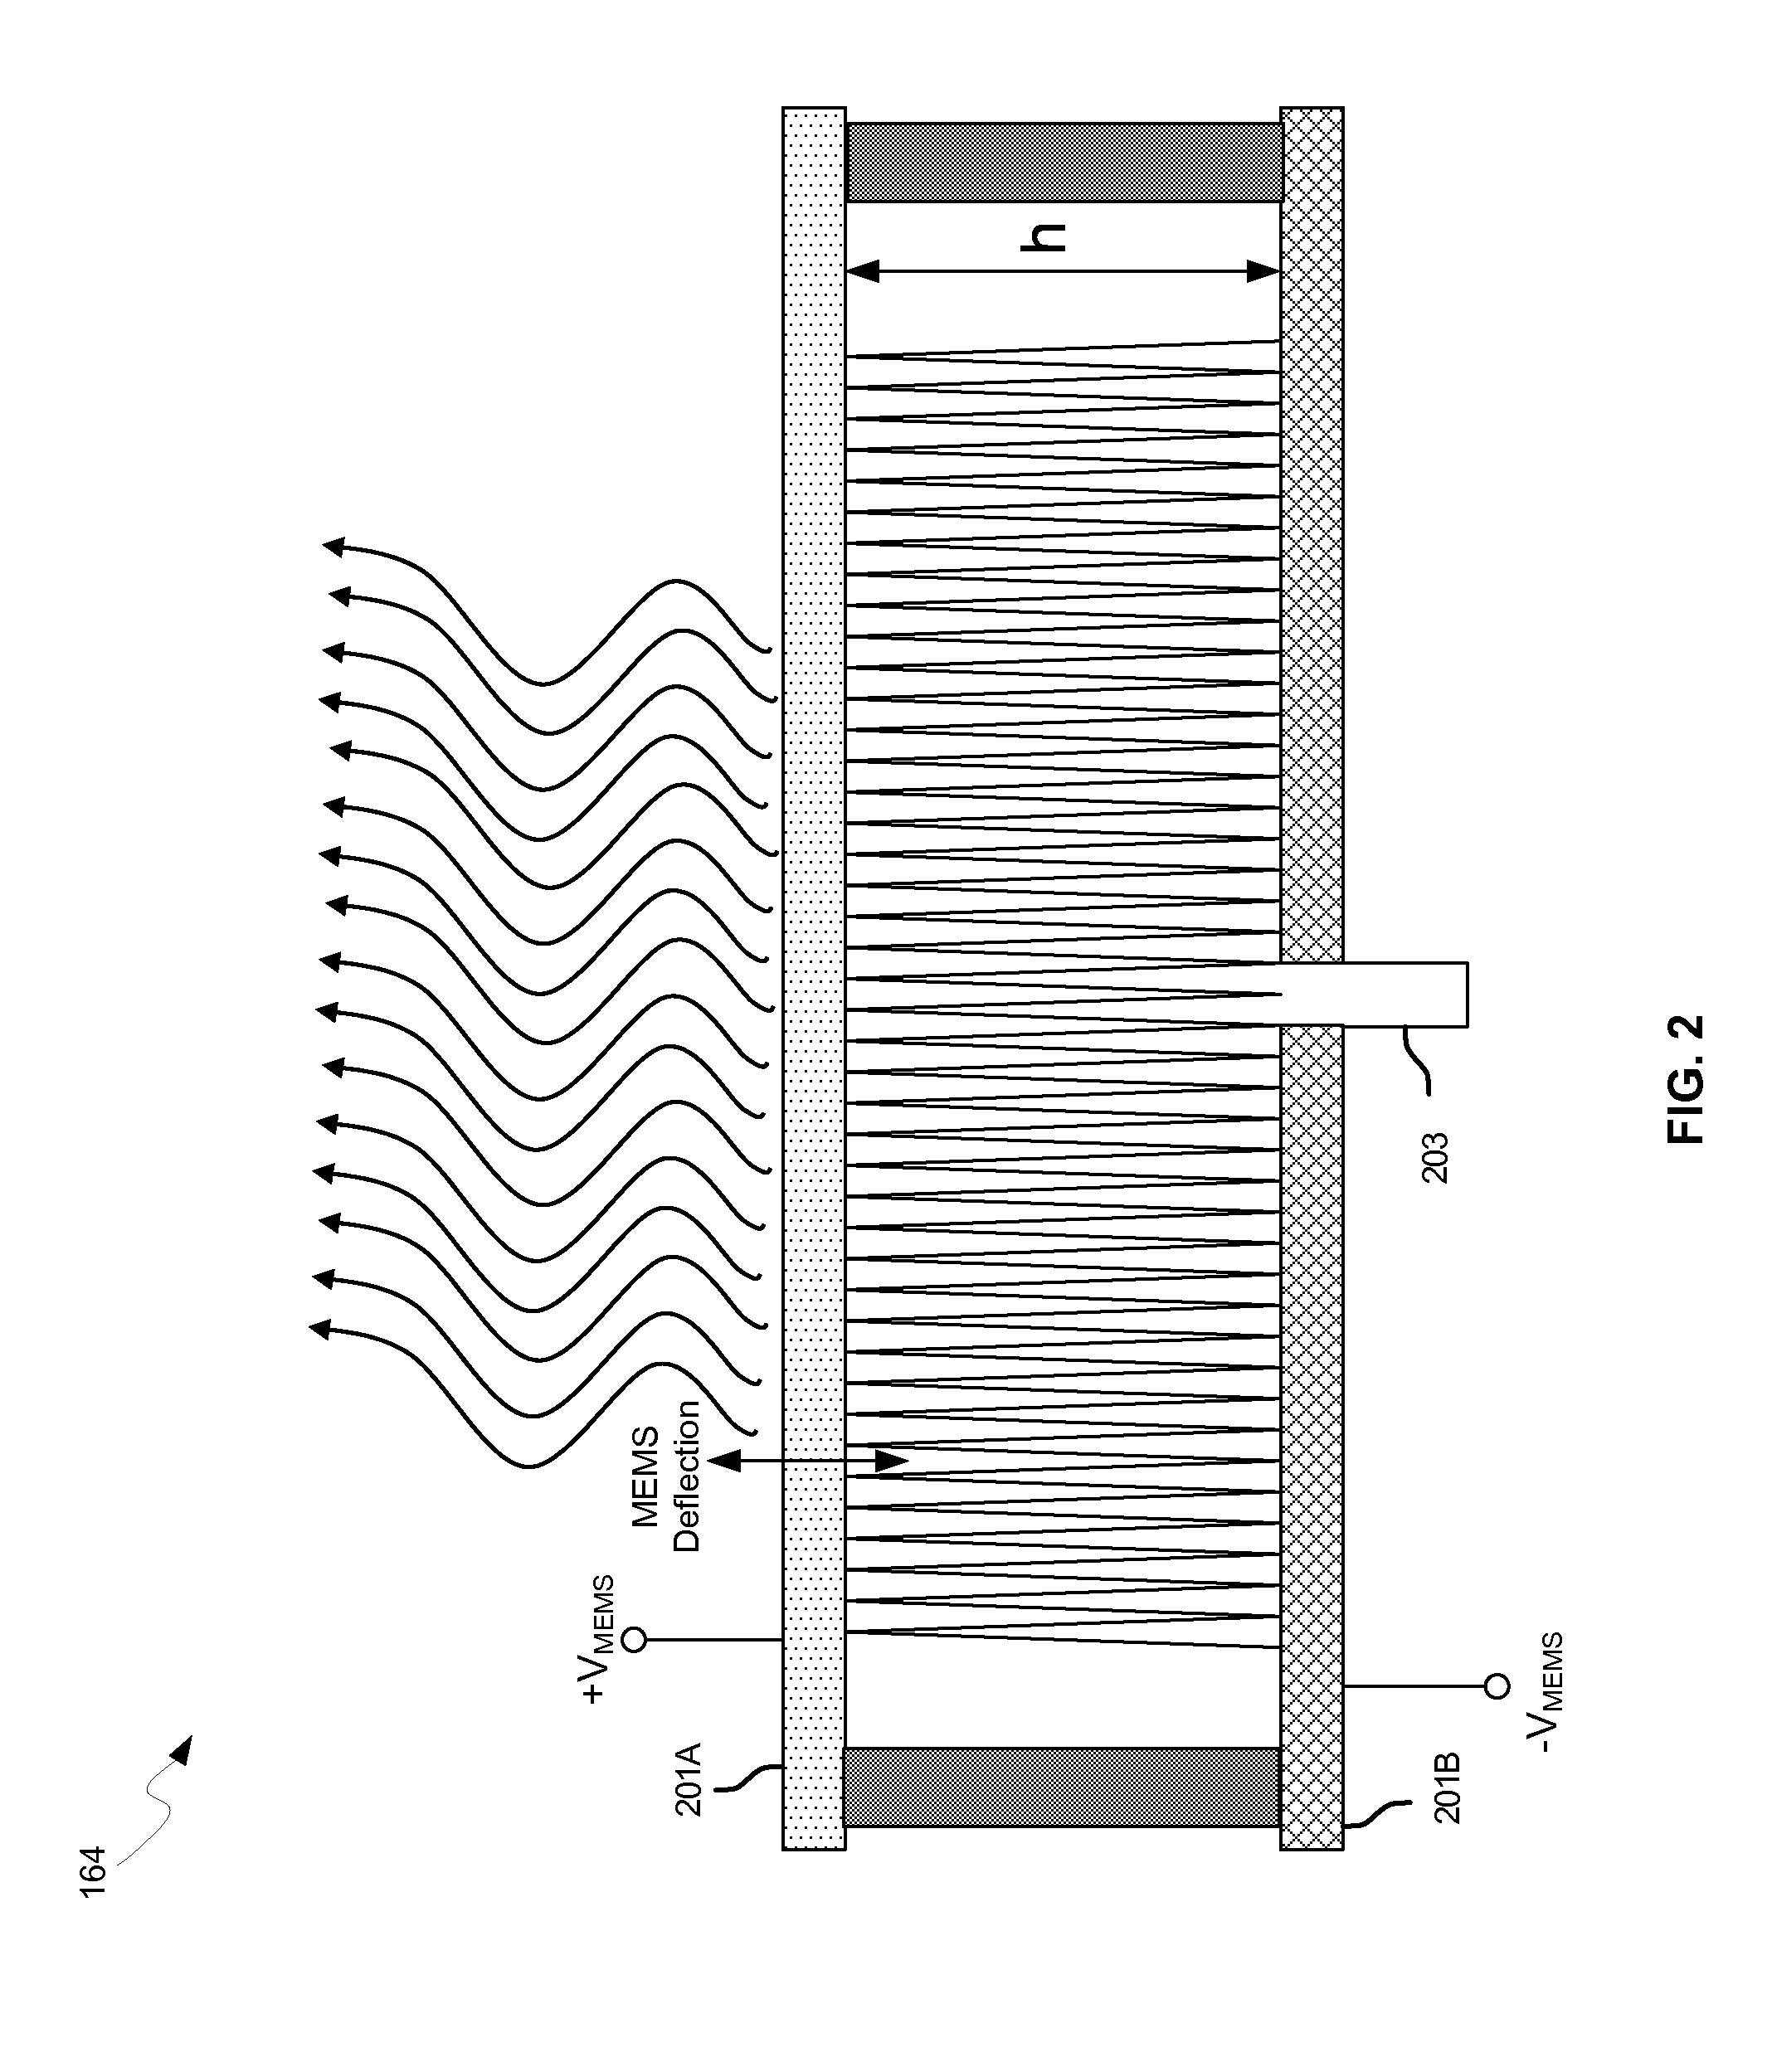 Method and system for dynamic tracking utilizing leaky wave antennas